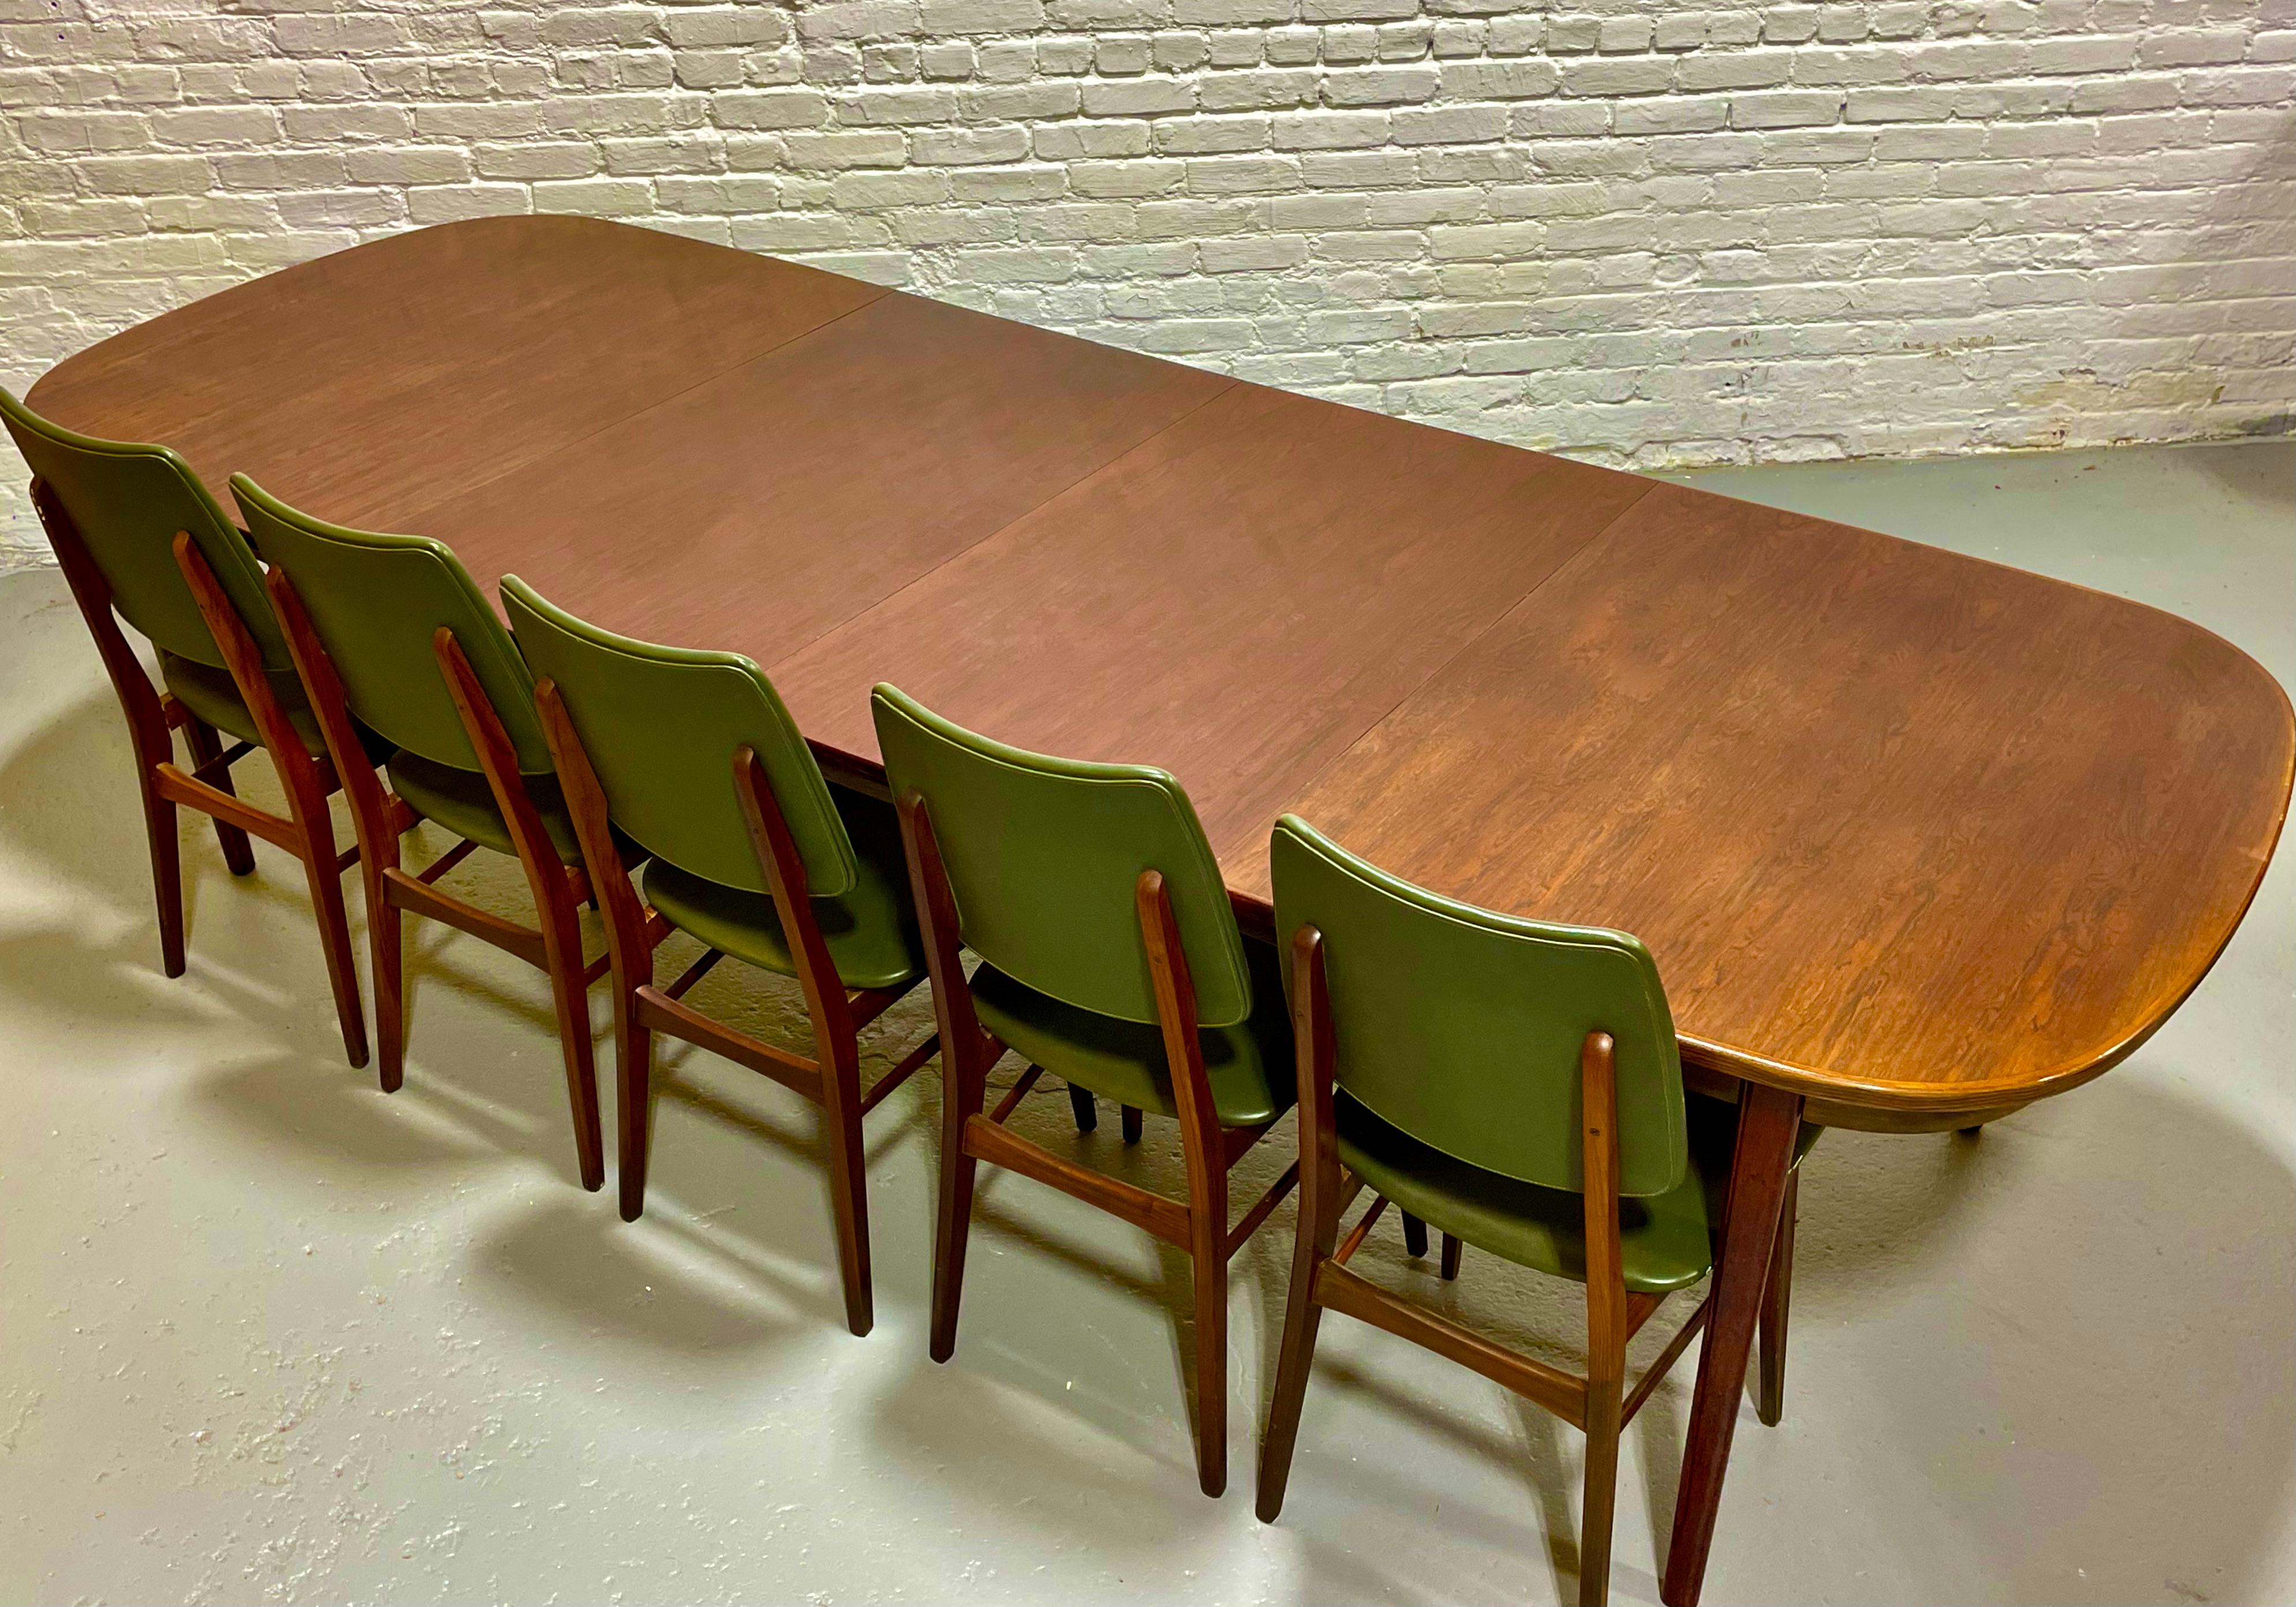 Extra Long Mid Century Modern Rosewood Oval-ish Dining Table, Made in Denmark, c. 1960’s.  The table expands to seat 12 guests - a truly rare find for those that love to entertain, but is compact in size without the leaves inserted and can